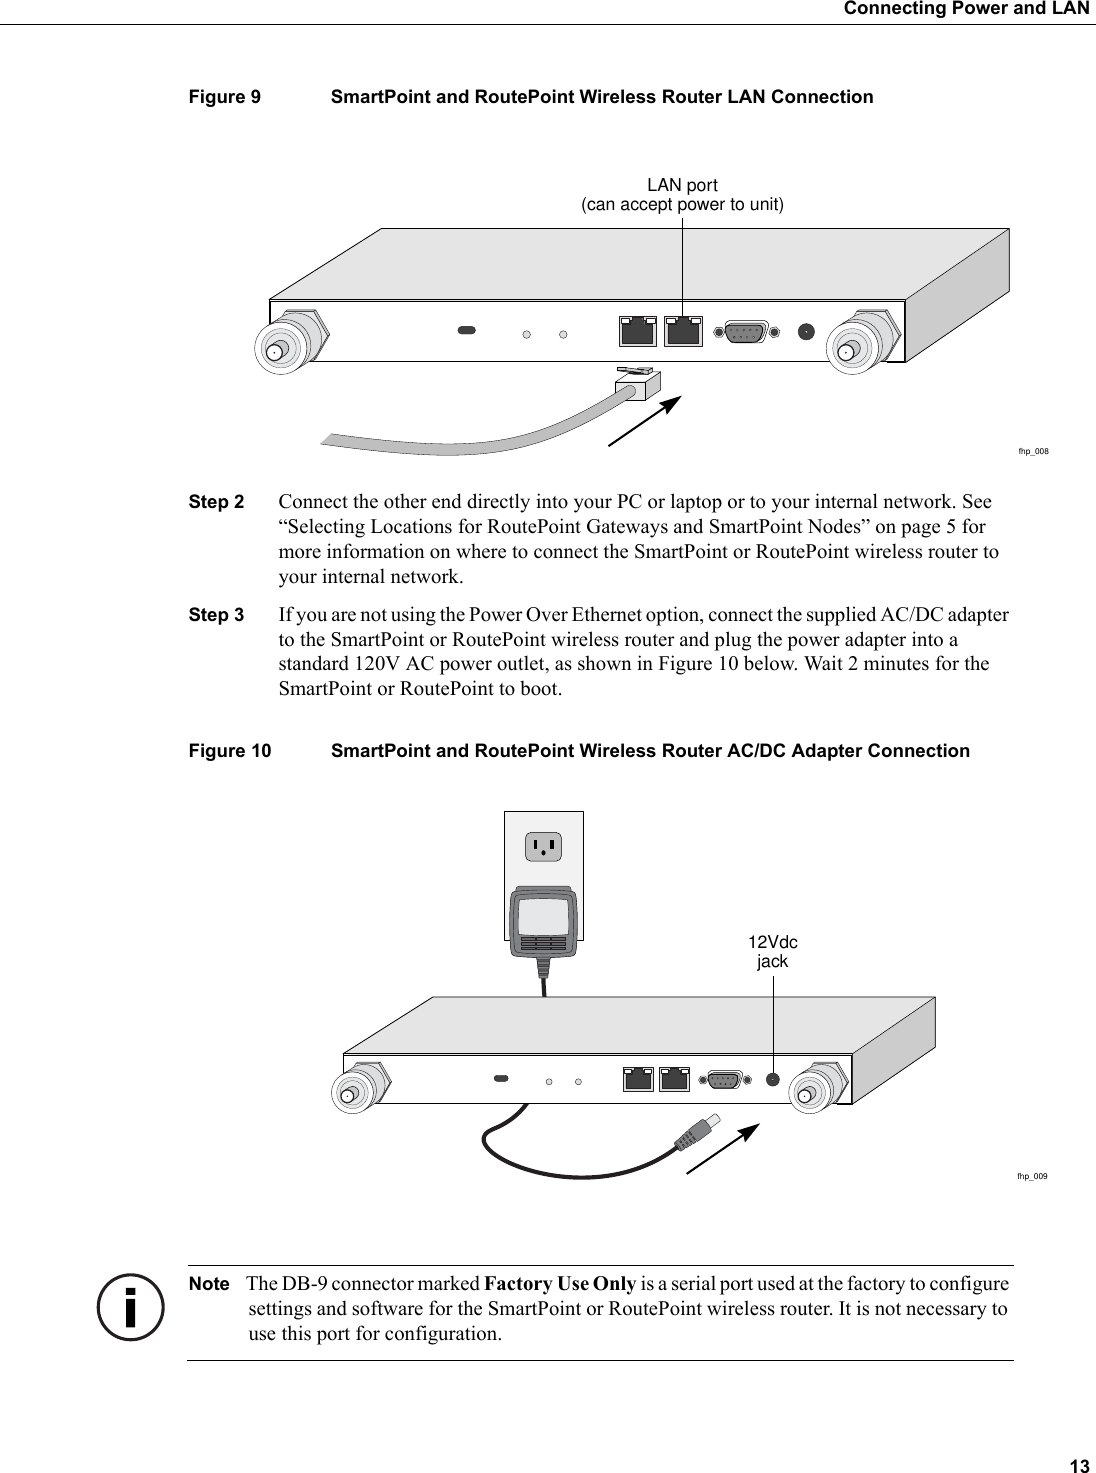  13Connecting Power and LANFigure 9 SmartPoint and RoutePoint Wireless Router LAN ConnectionStep 2 Connect the other end directly into your PC or laptop or to your internal network. See “Selecting Locations for RoutePoint Gateways and SmartPoint Nodes” on page 5 for more information on where to connect the SmartPoint or RoutePoint wireless router to your internal network. Step 3 If you are not using the Power Over Ethernet option, connect the supplied AC/DC adapter to the SmartPoint or RoutePoint wireless router and plug the power adapter into a standard 120V AC power outlet, as shown in Figure 10 below. Wait 2 minutes for the SmartPoint or RoutePoint to boot.Figure 10 SmartPoint and RoutePoint Wireless Router AC/DC Adapter Connection Note The DB-9 connector marked Factory Use Only is a serial port used at the factory to configure settings and software for the SmartPoint or RoutePoint wireless router. It is not necessary to use this port for configuration.fhp_008LAN port(can accept power to unit)fhp_00912Vdcjack